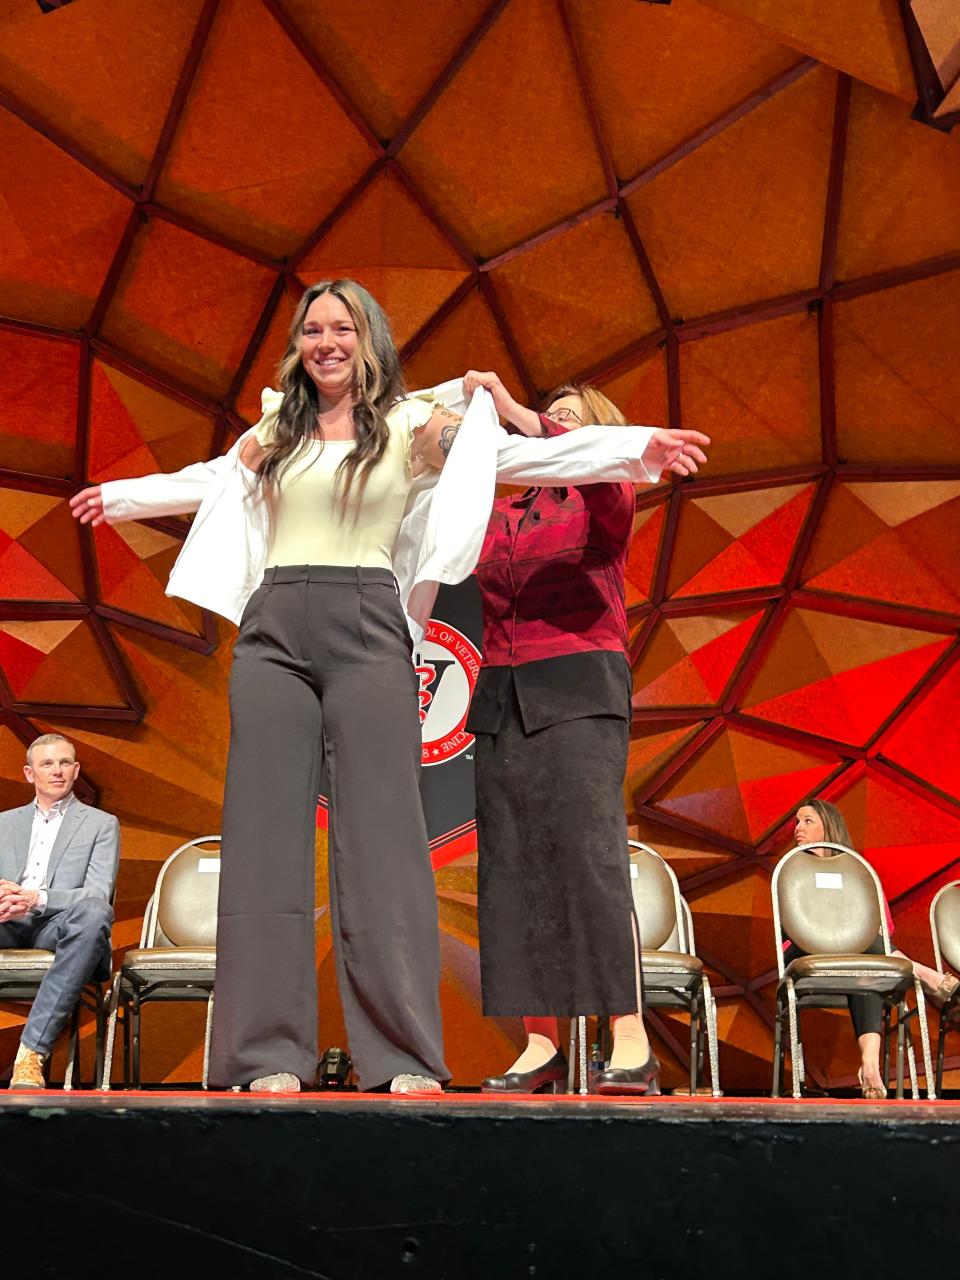 Kenzie Salzman was "coated" by Dr. Nancy Zimmerman Sunday during the Texas Tech vet school's first white coat ceremony at the Globe-News Center. Grads will go to clinicals in the next step of becoming veterinarians.